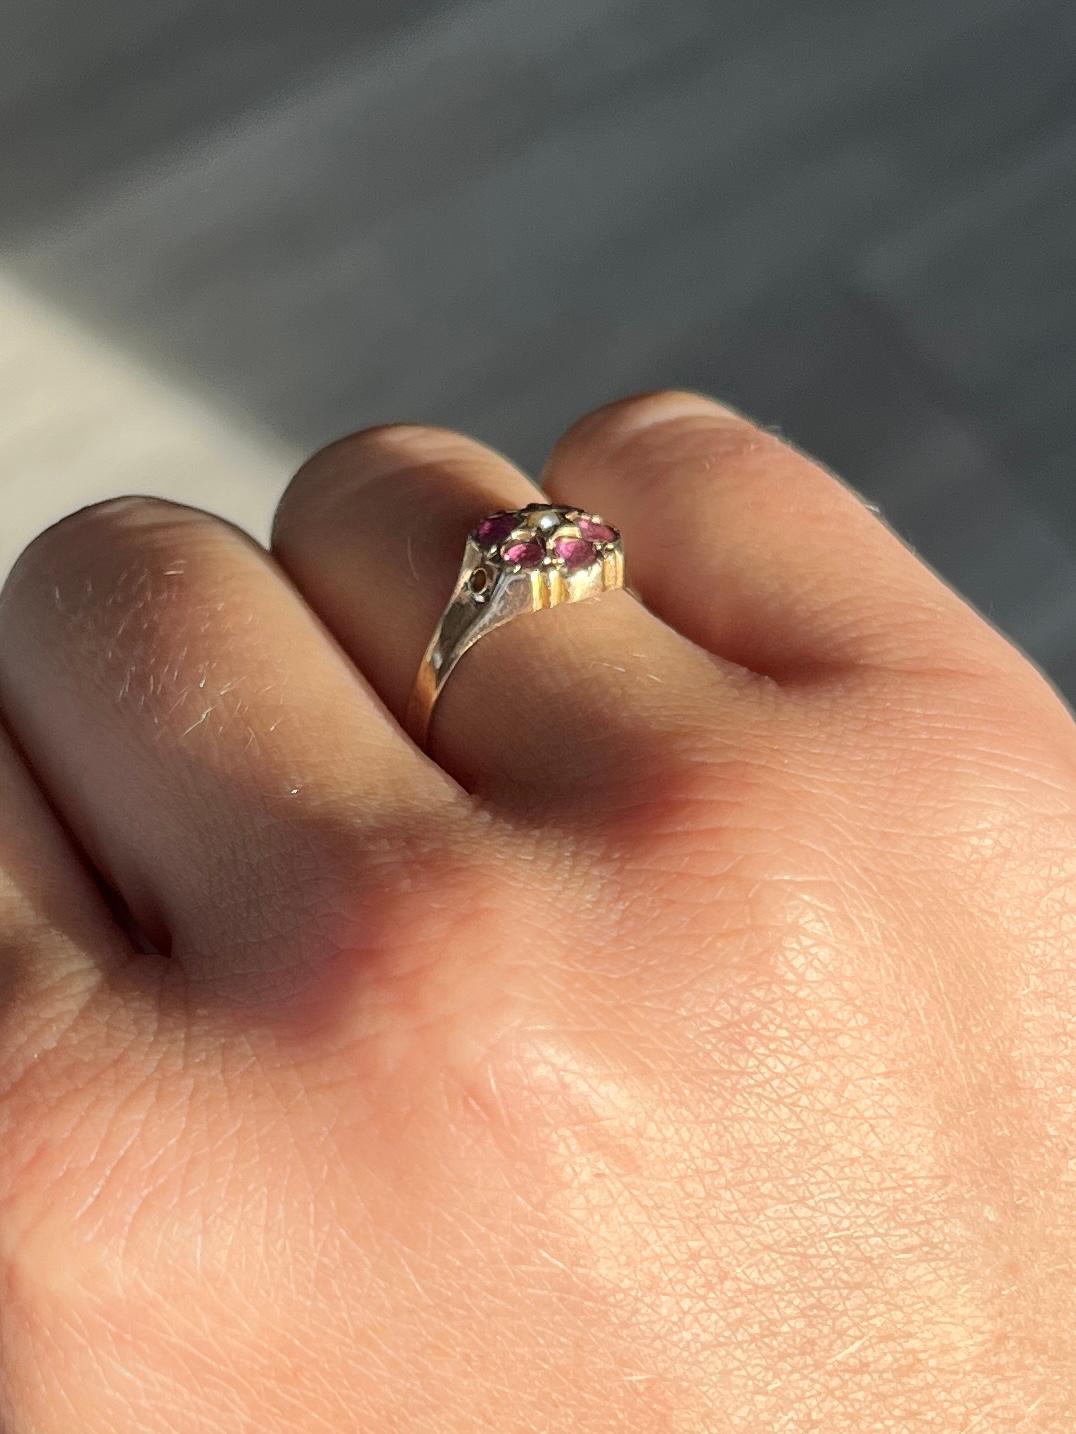 A wonderful amethyst cluster ring with a pearl at the centre. Amethyst total 30pts. Modelled in 9carat gold.

Ring Size: L or 5 3/4 
Cluster diameter: 9mm

Weight: 1.4g